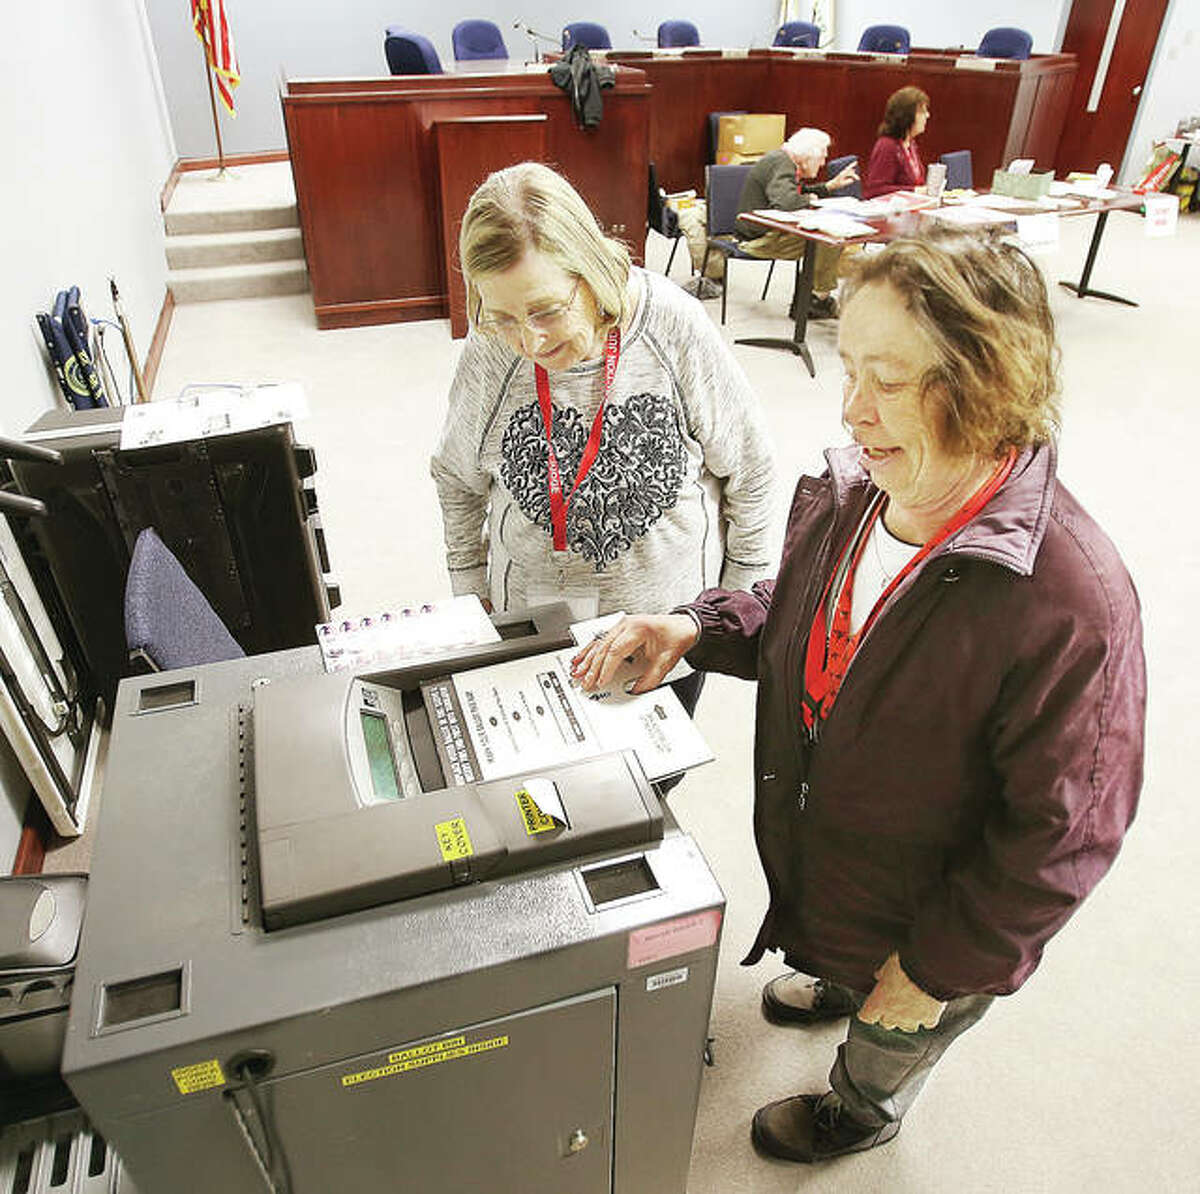 Election judge Lillian Phipps, left, watches as fellow judge Bonnie McClain, of Wood River, feeds her ballot into the tabulation machine Tuesday morning at Wood River Precinct 3, which voted at Wood River City Hall. McClain took advantage of the peace and quiet to cast her vote while waiting. By 9 a.m. only five people had cast ballots in the precinct by that time.